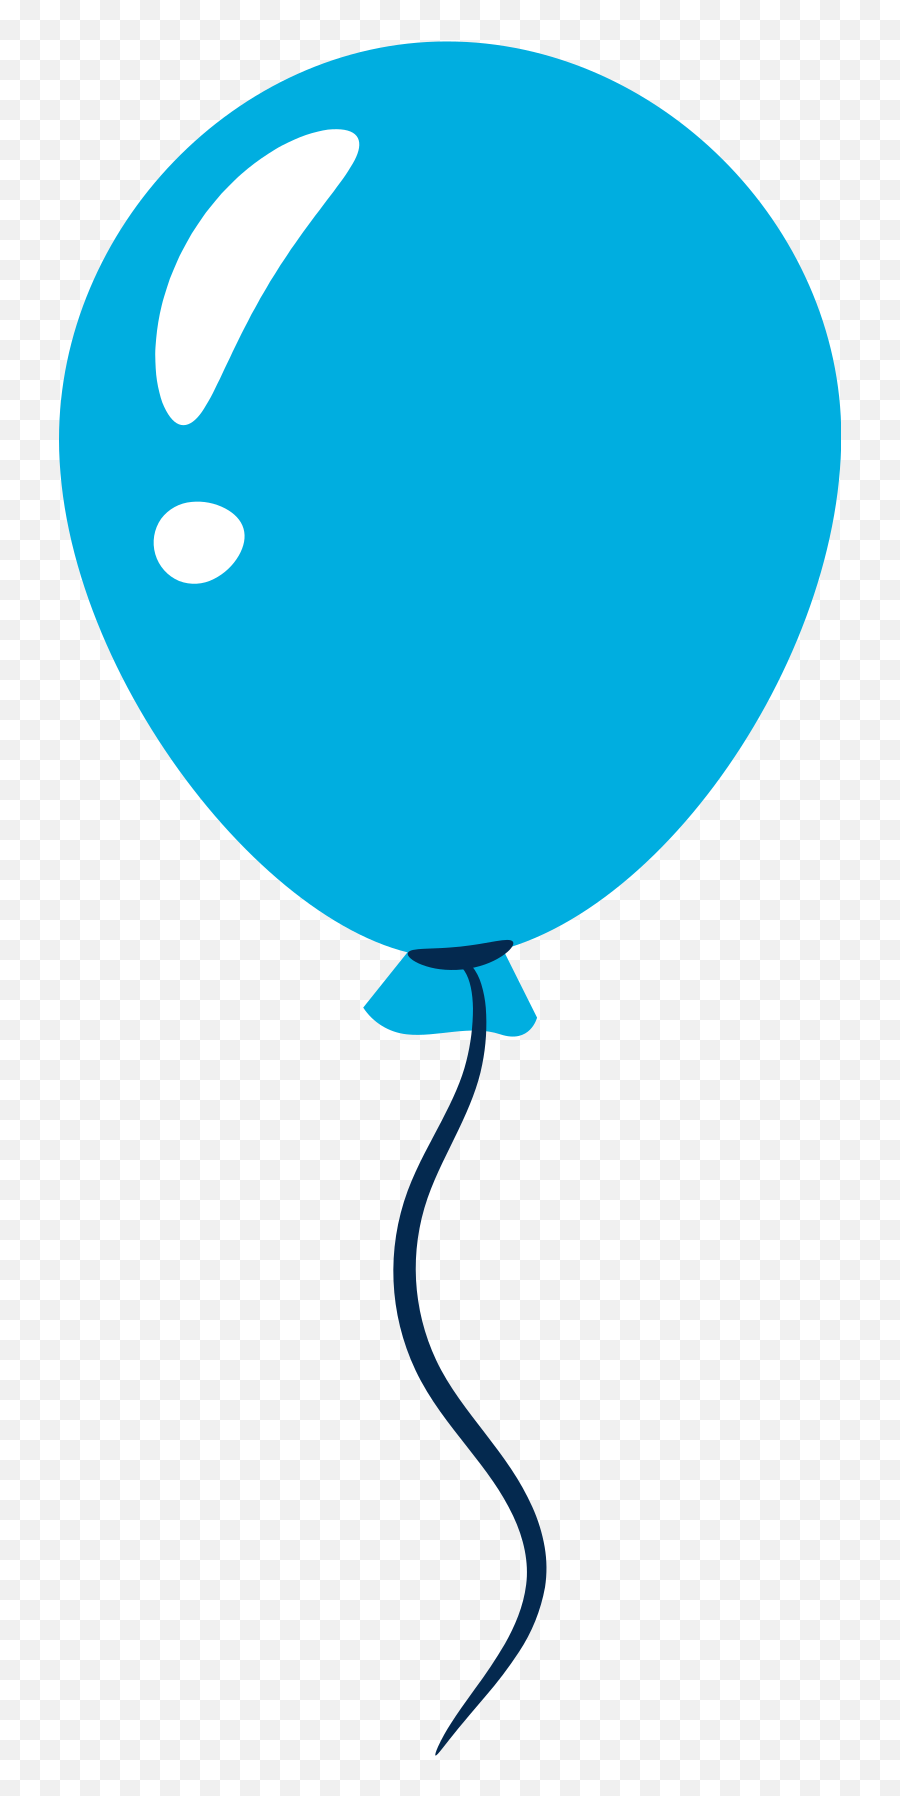 Style Blue Balloon Vector Images In Png And Svg Icons8 - Balloon,Balloon Icon